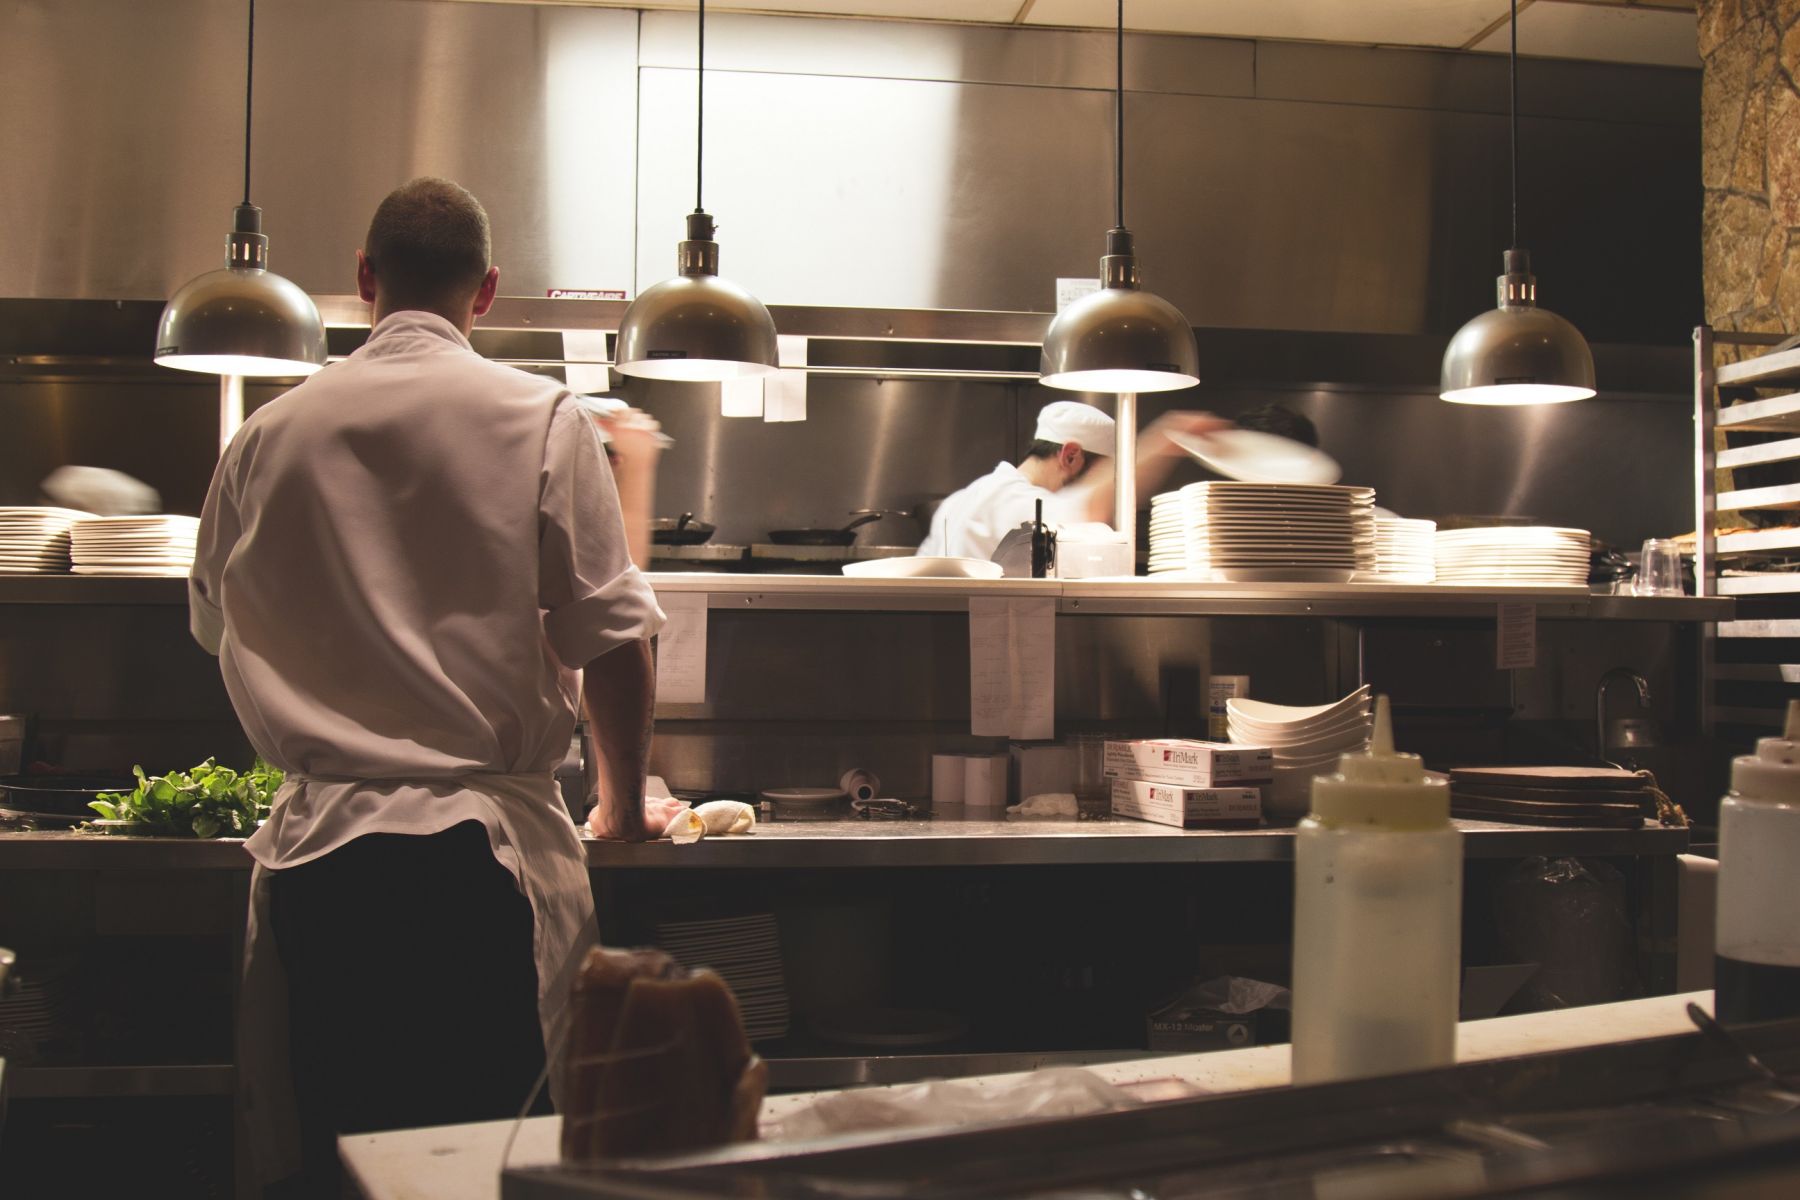 Cleaning Services for Restaurants